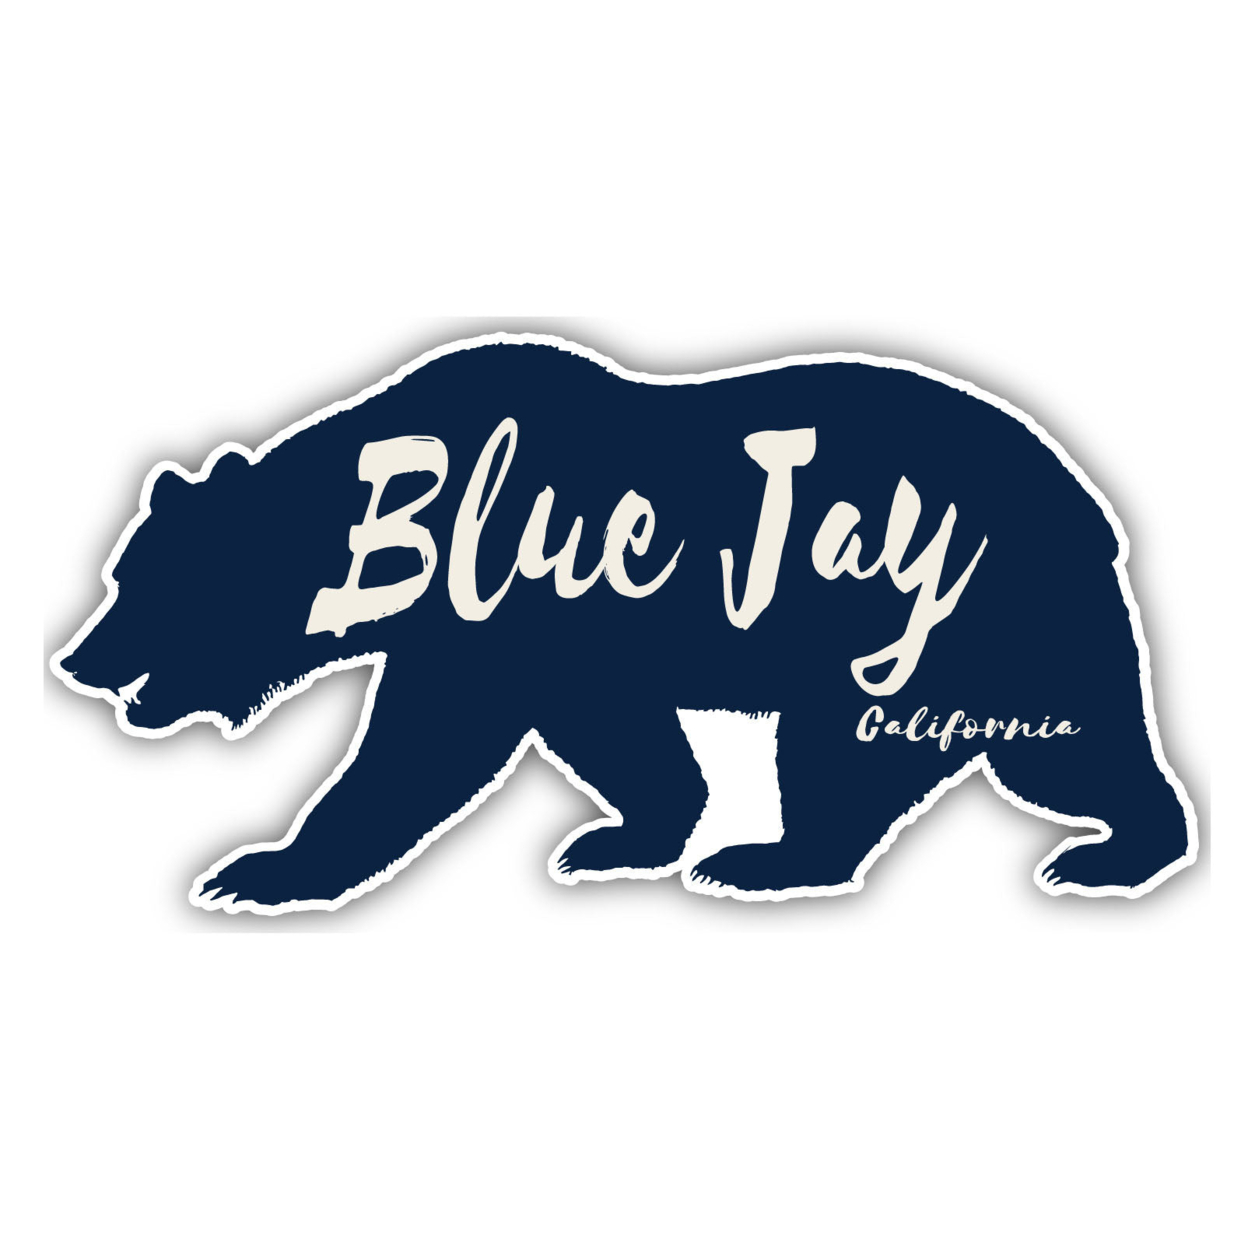 Blue Jay California Souvenir Decorative Stickers (Choose Theme And Size) - 4-Pack, 2-Inch, Bear